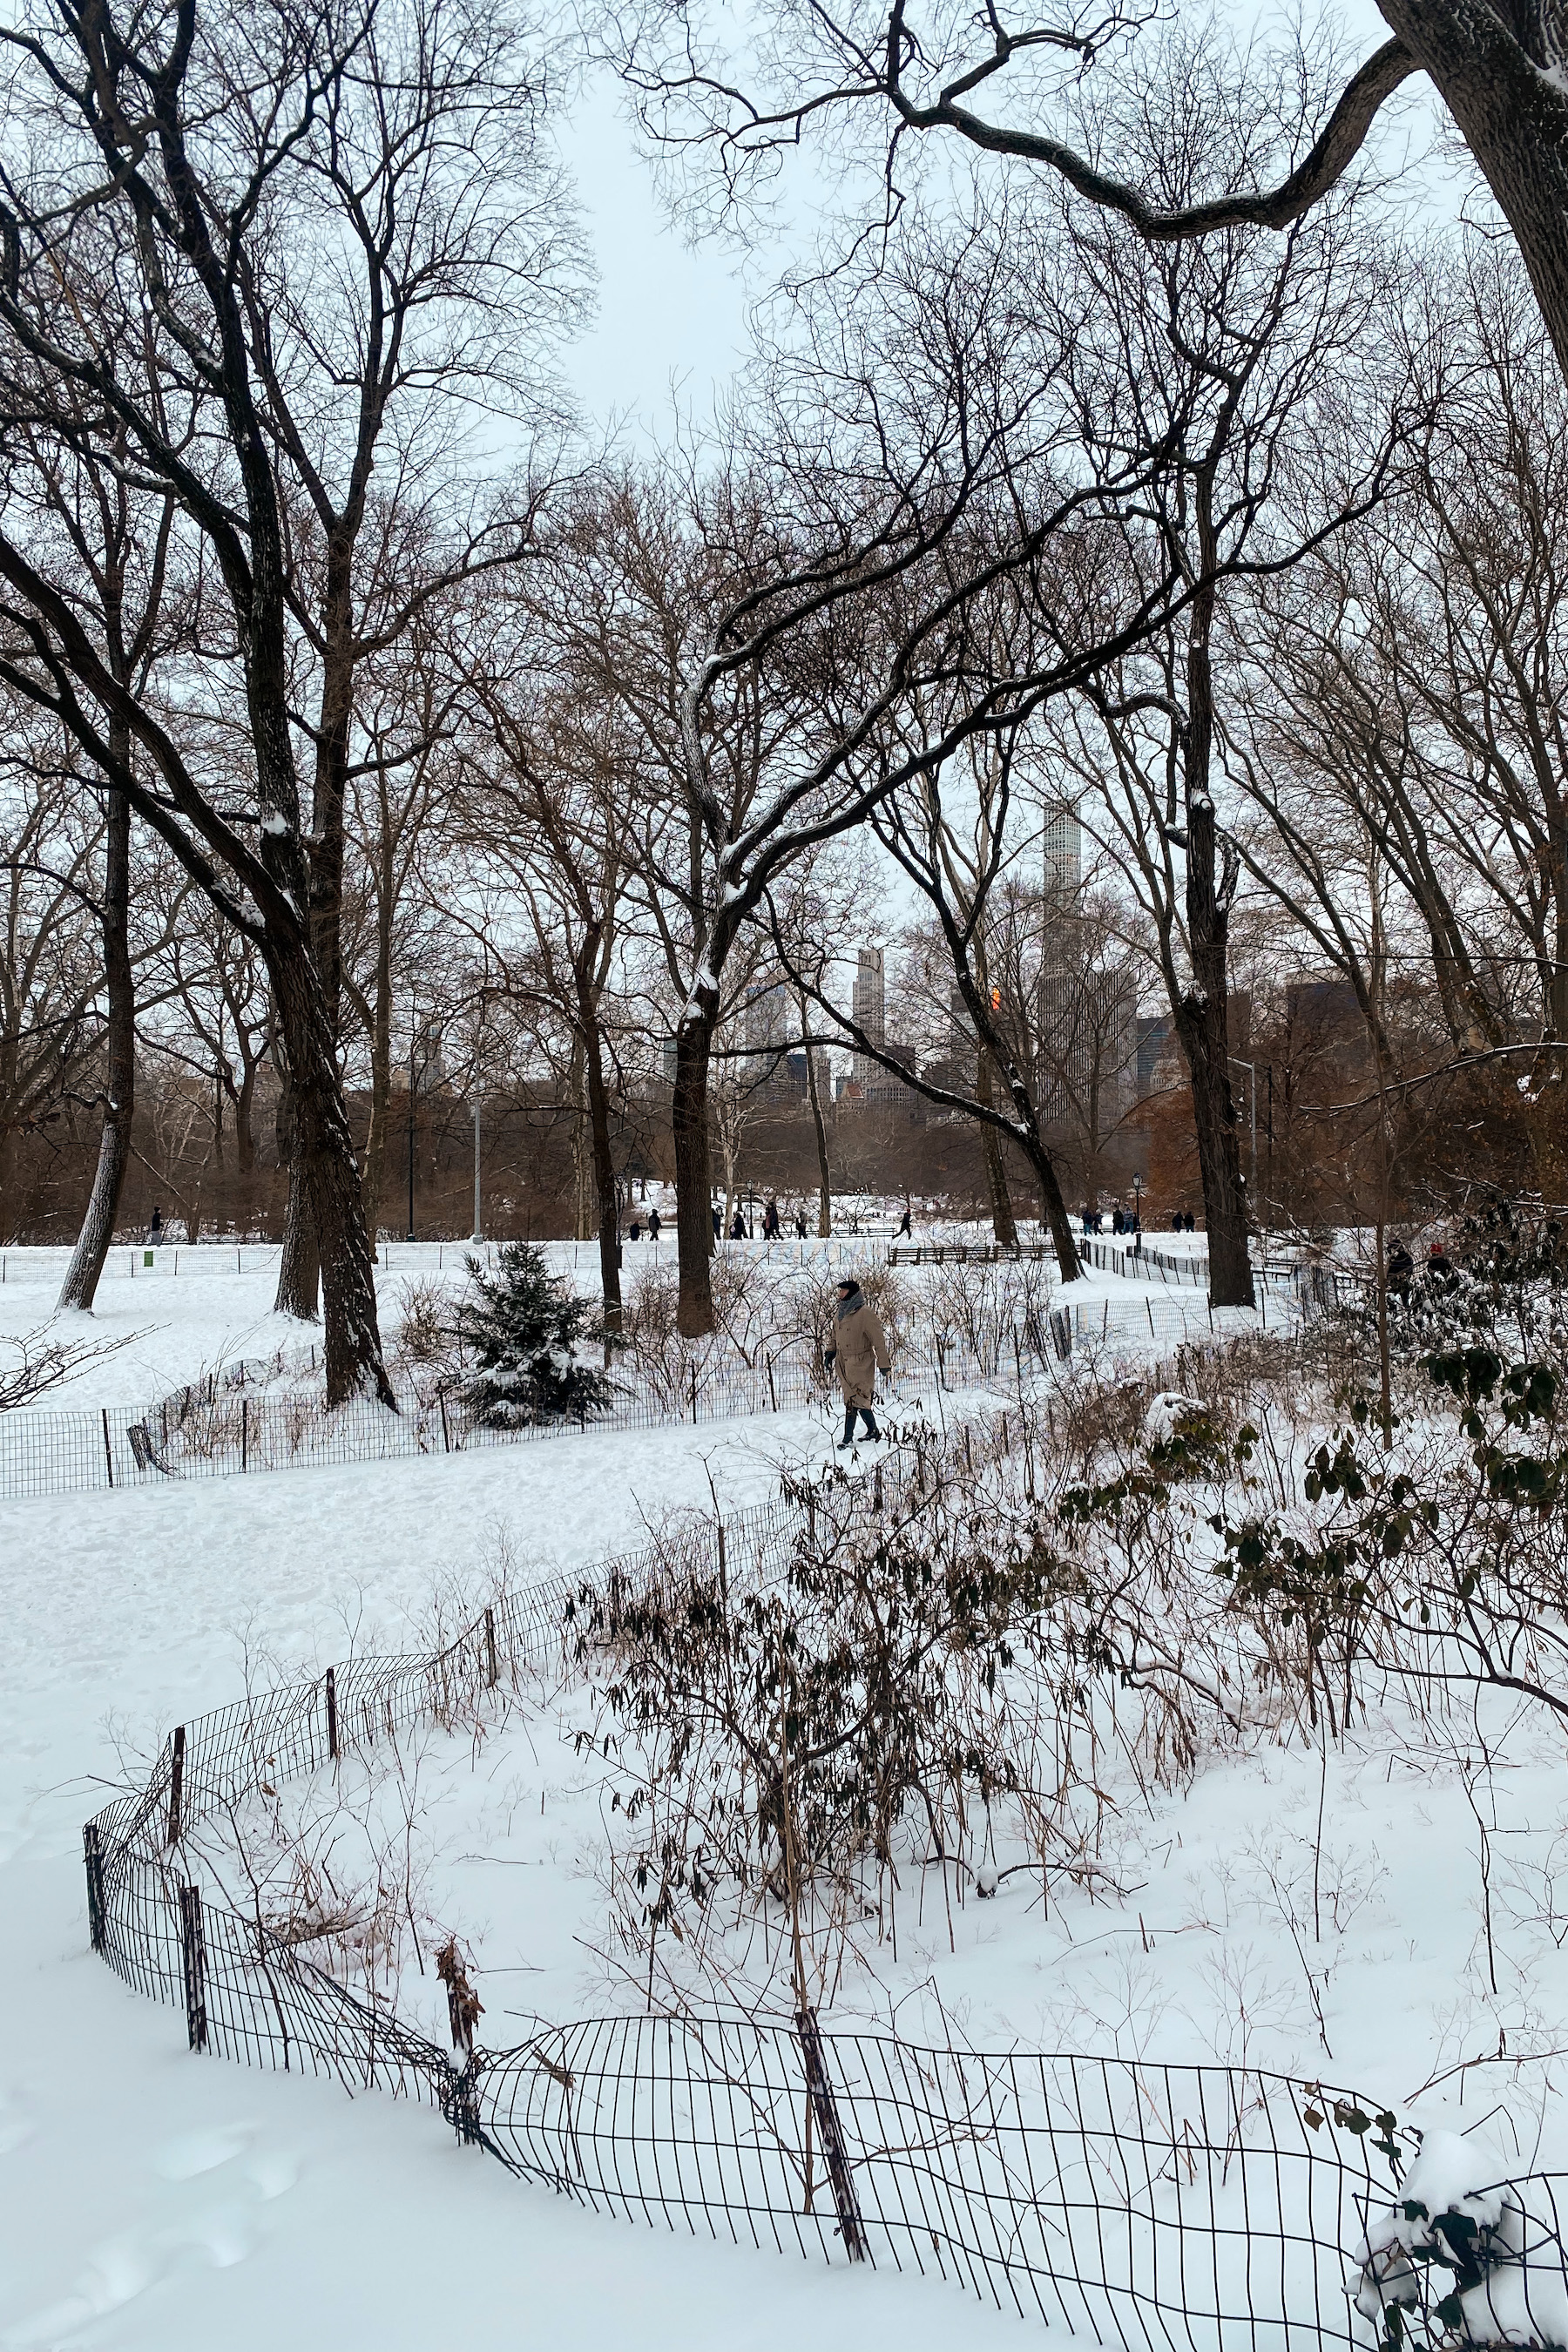 NYC central park in winter